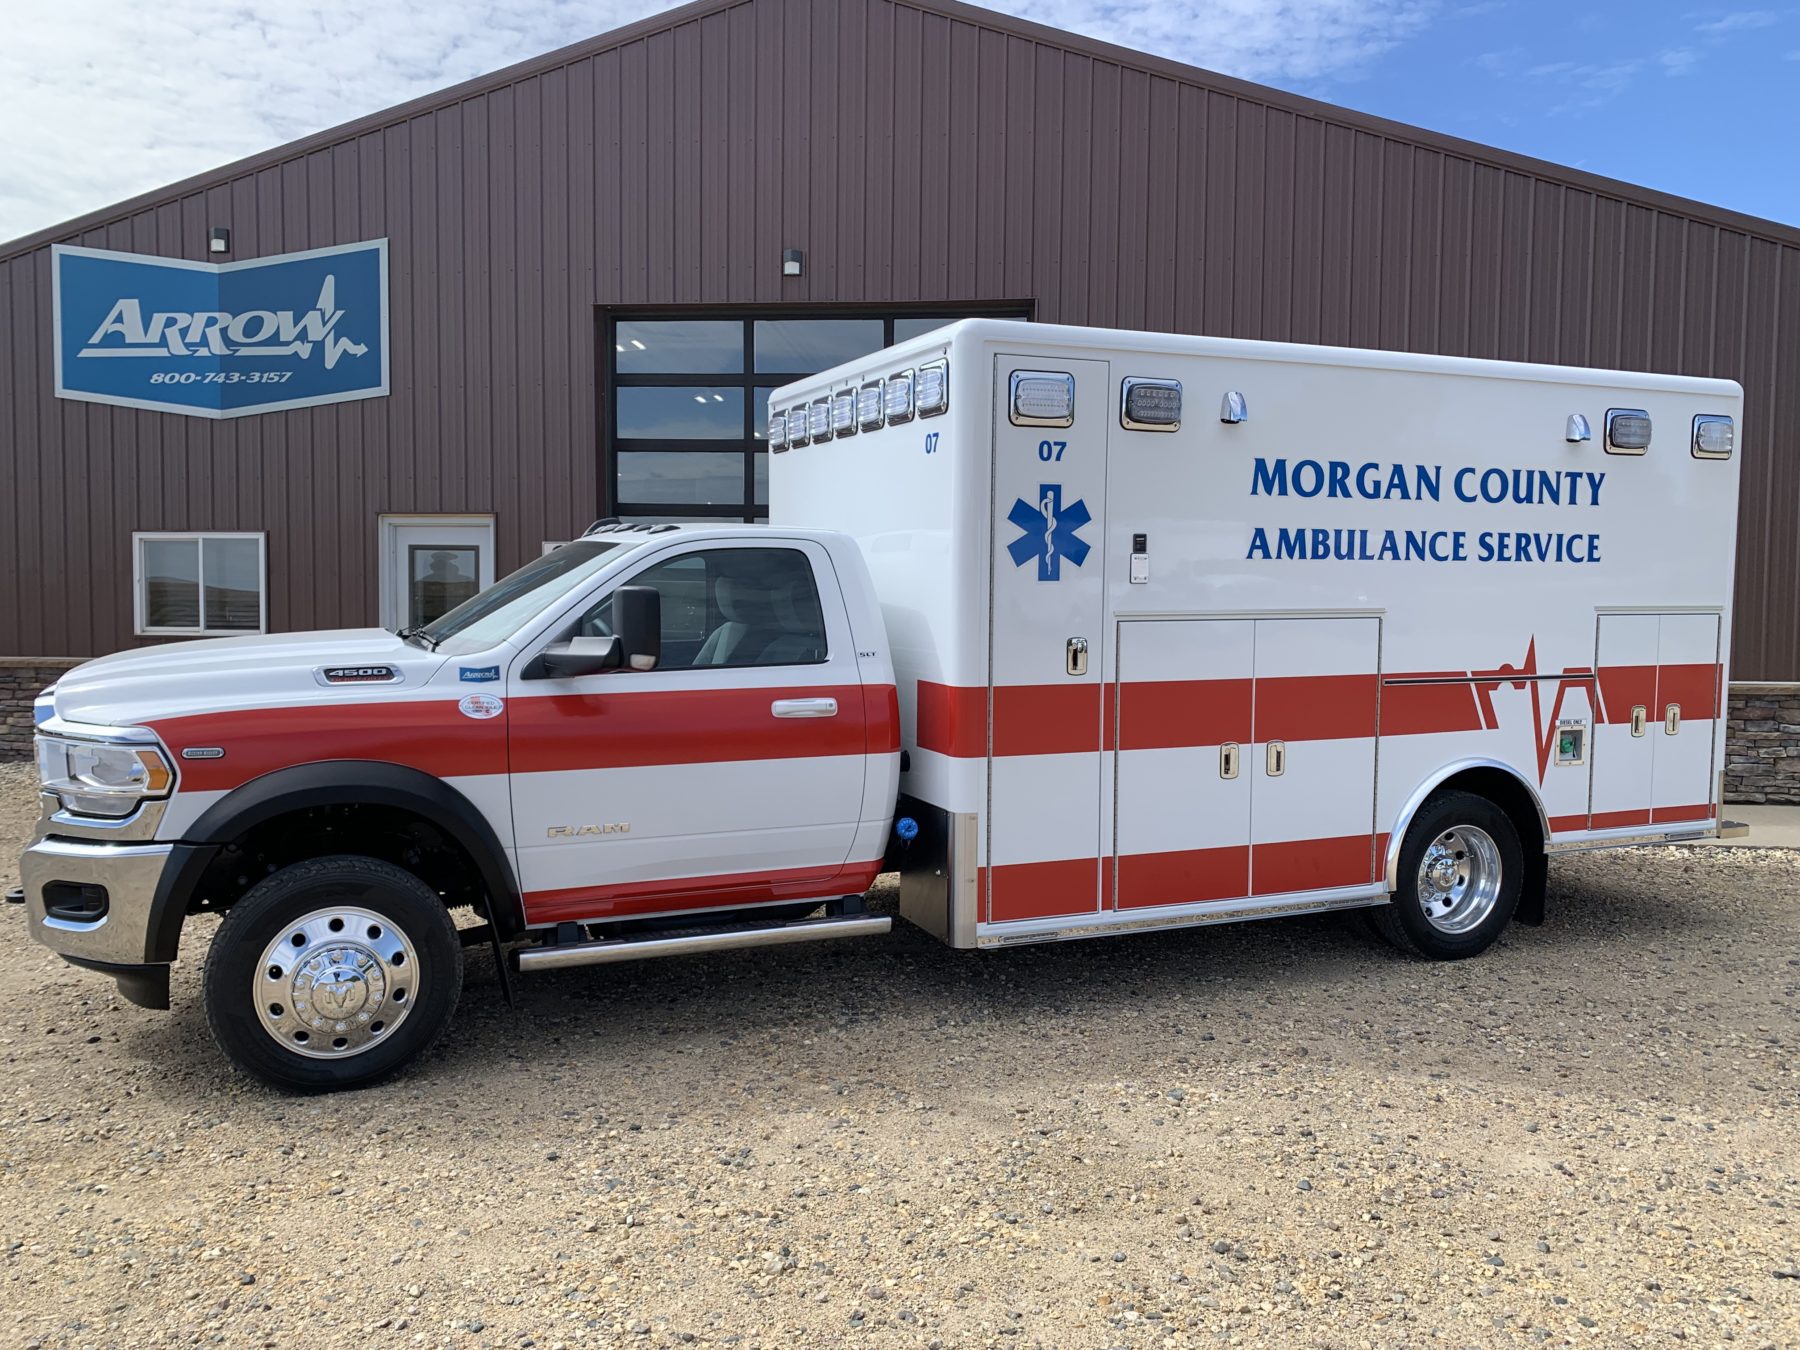 2021 Ram 4500 4x4 Heavy Duty Ambulance For Sale – Picture 4